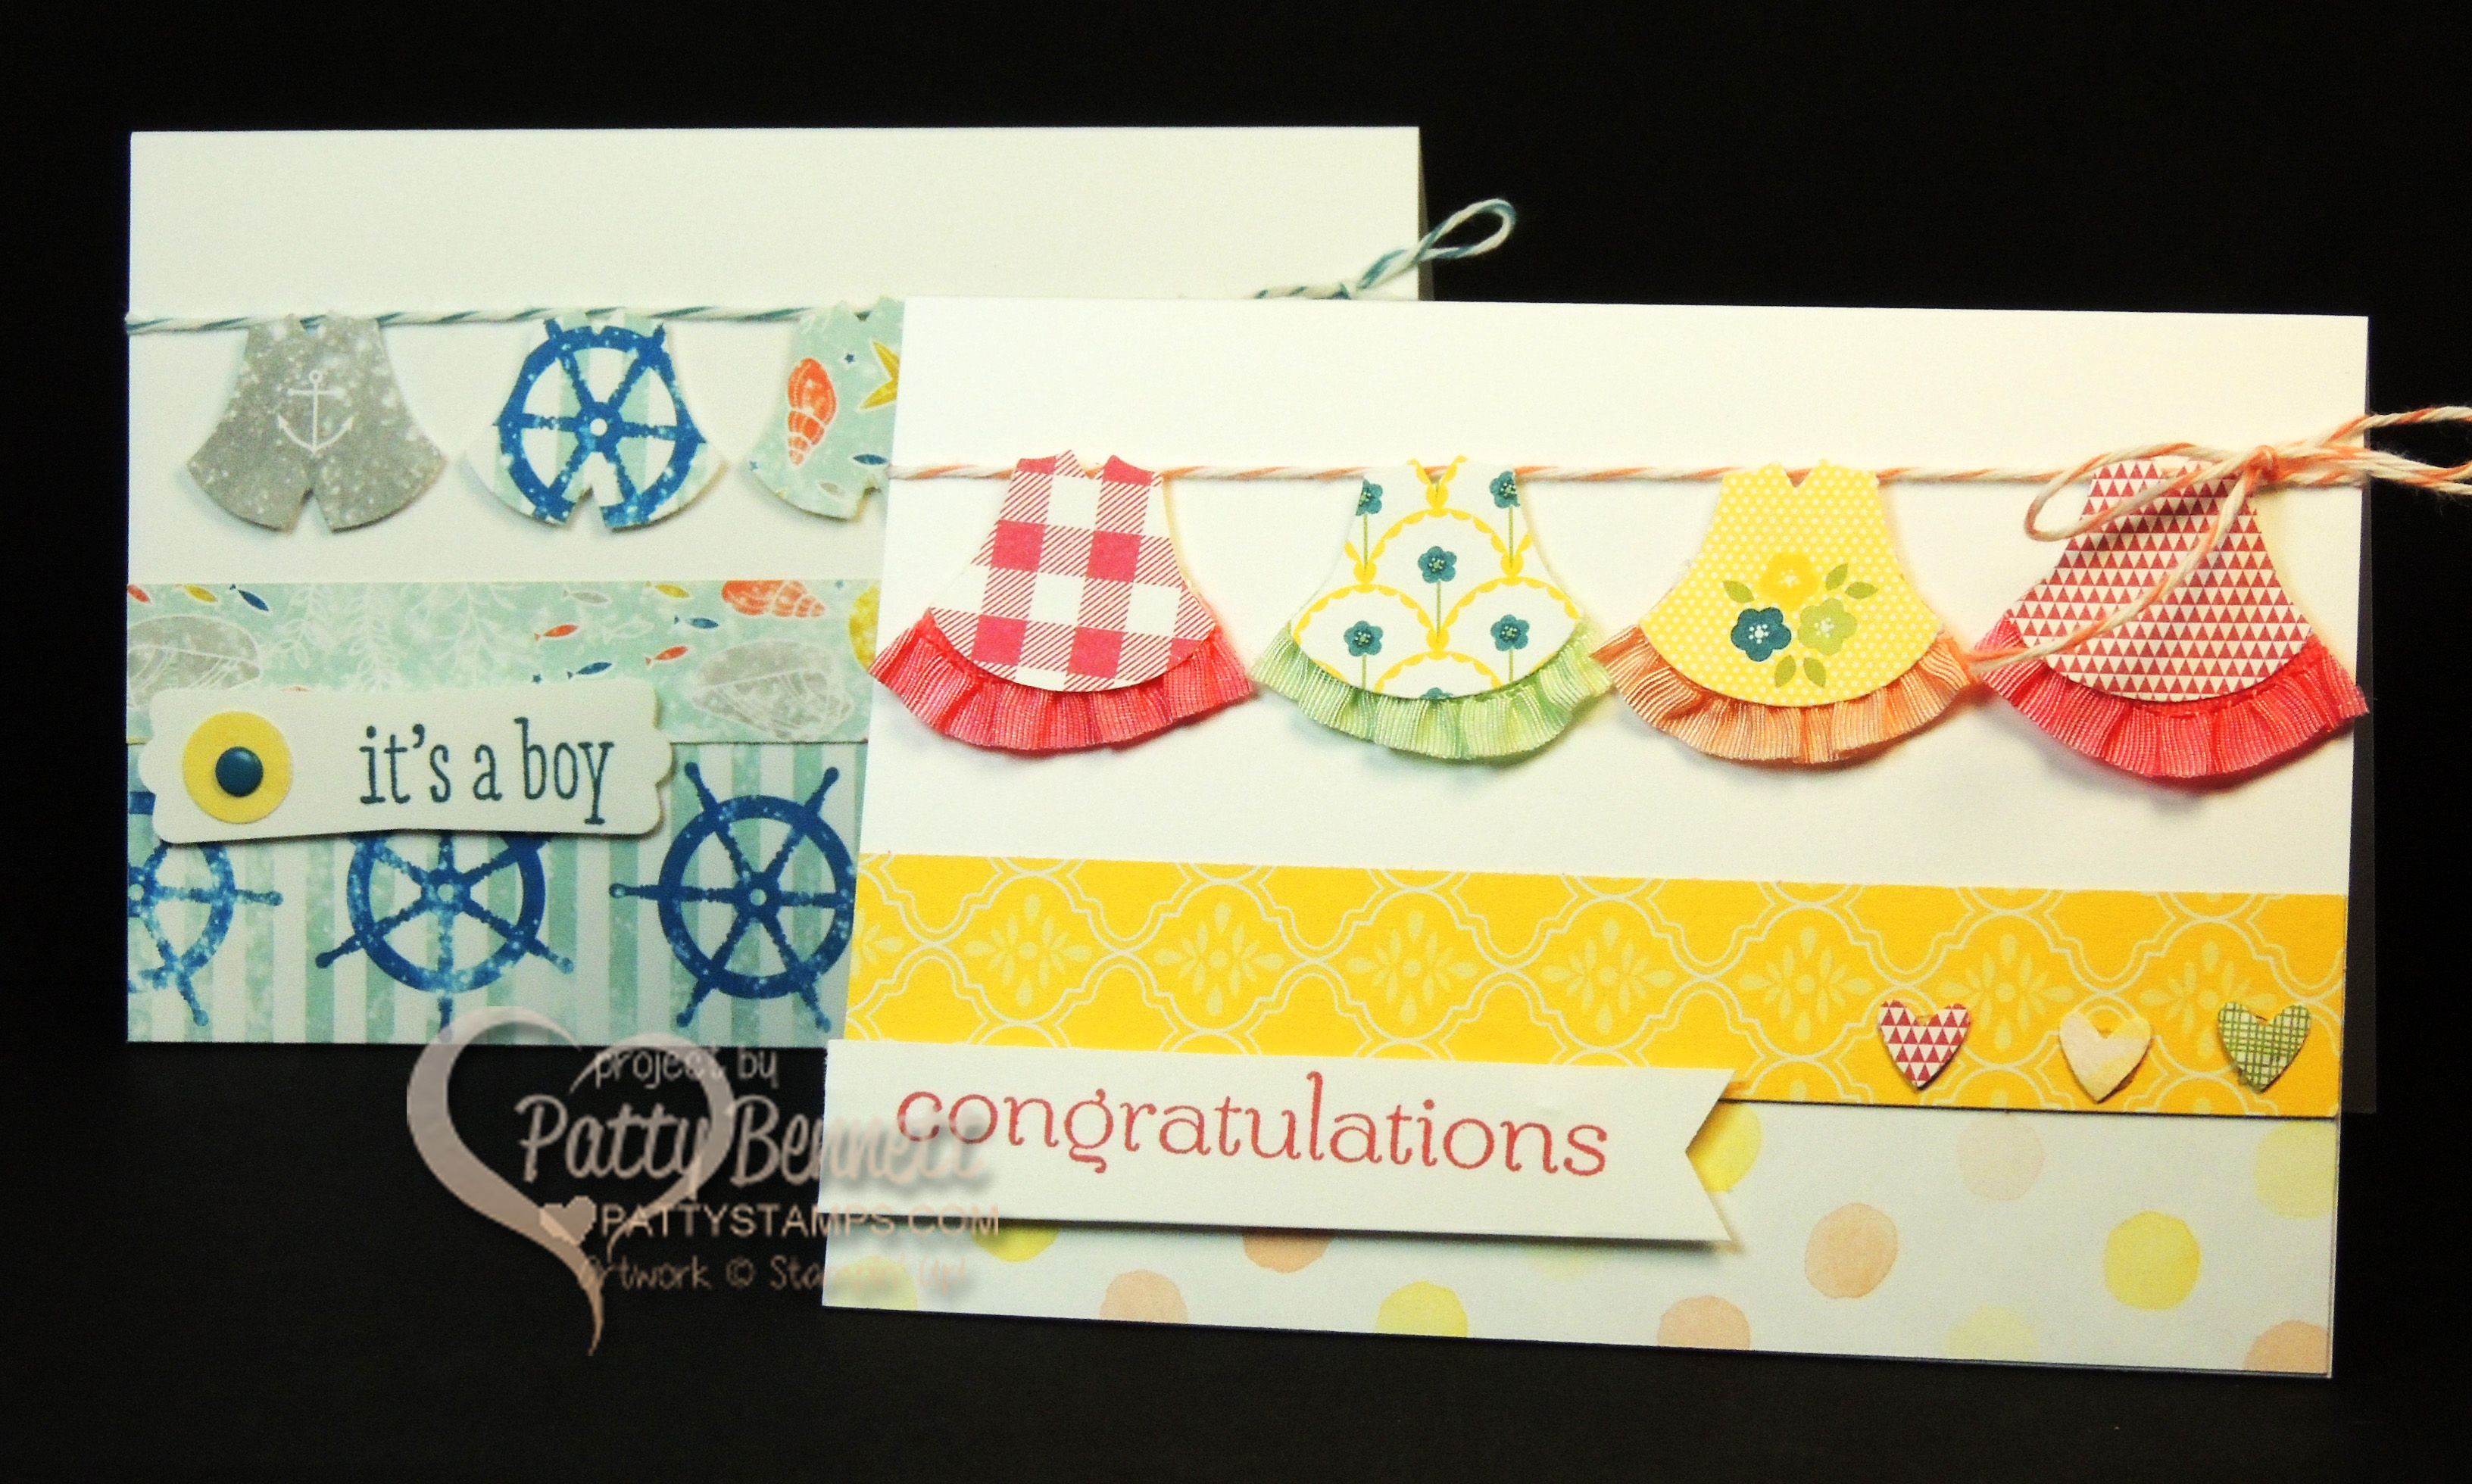 Stampin Up Boy Birthday Card Ideas More Ba Cards With The Stampin Up Owl Punch Patty Stamps